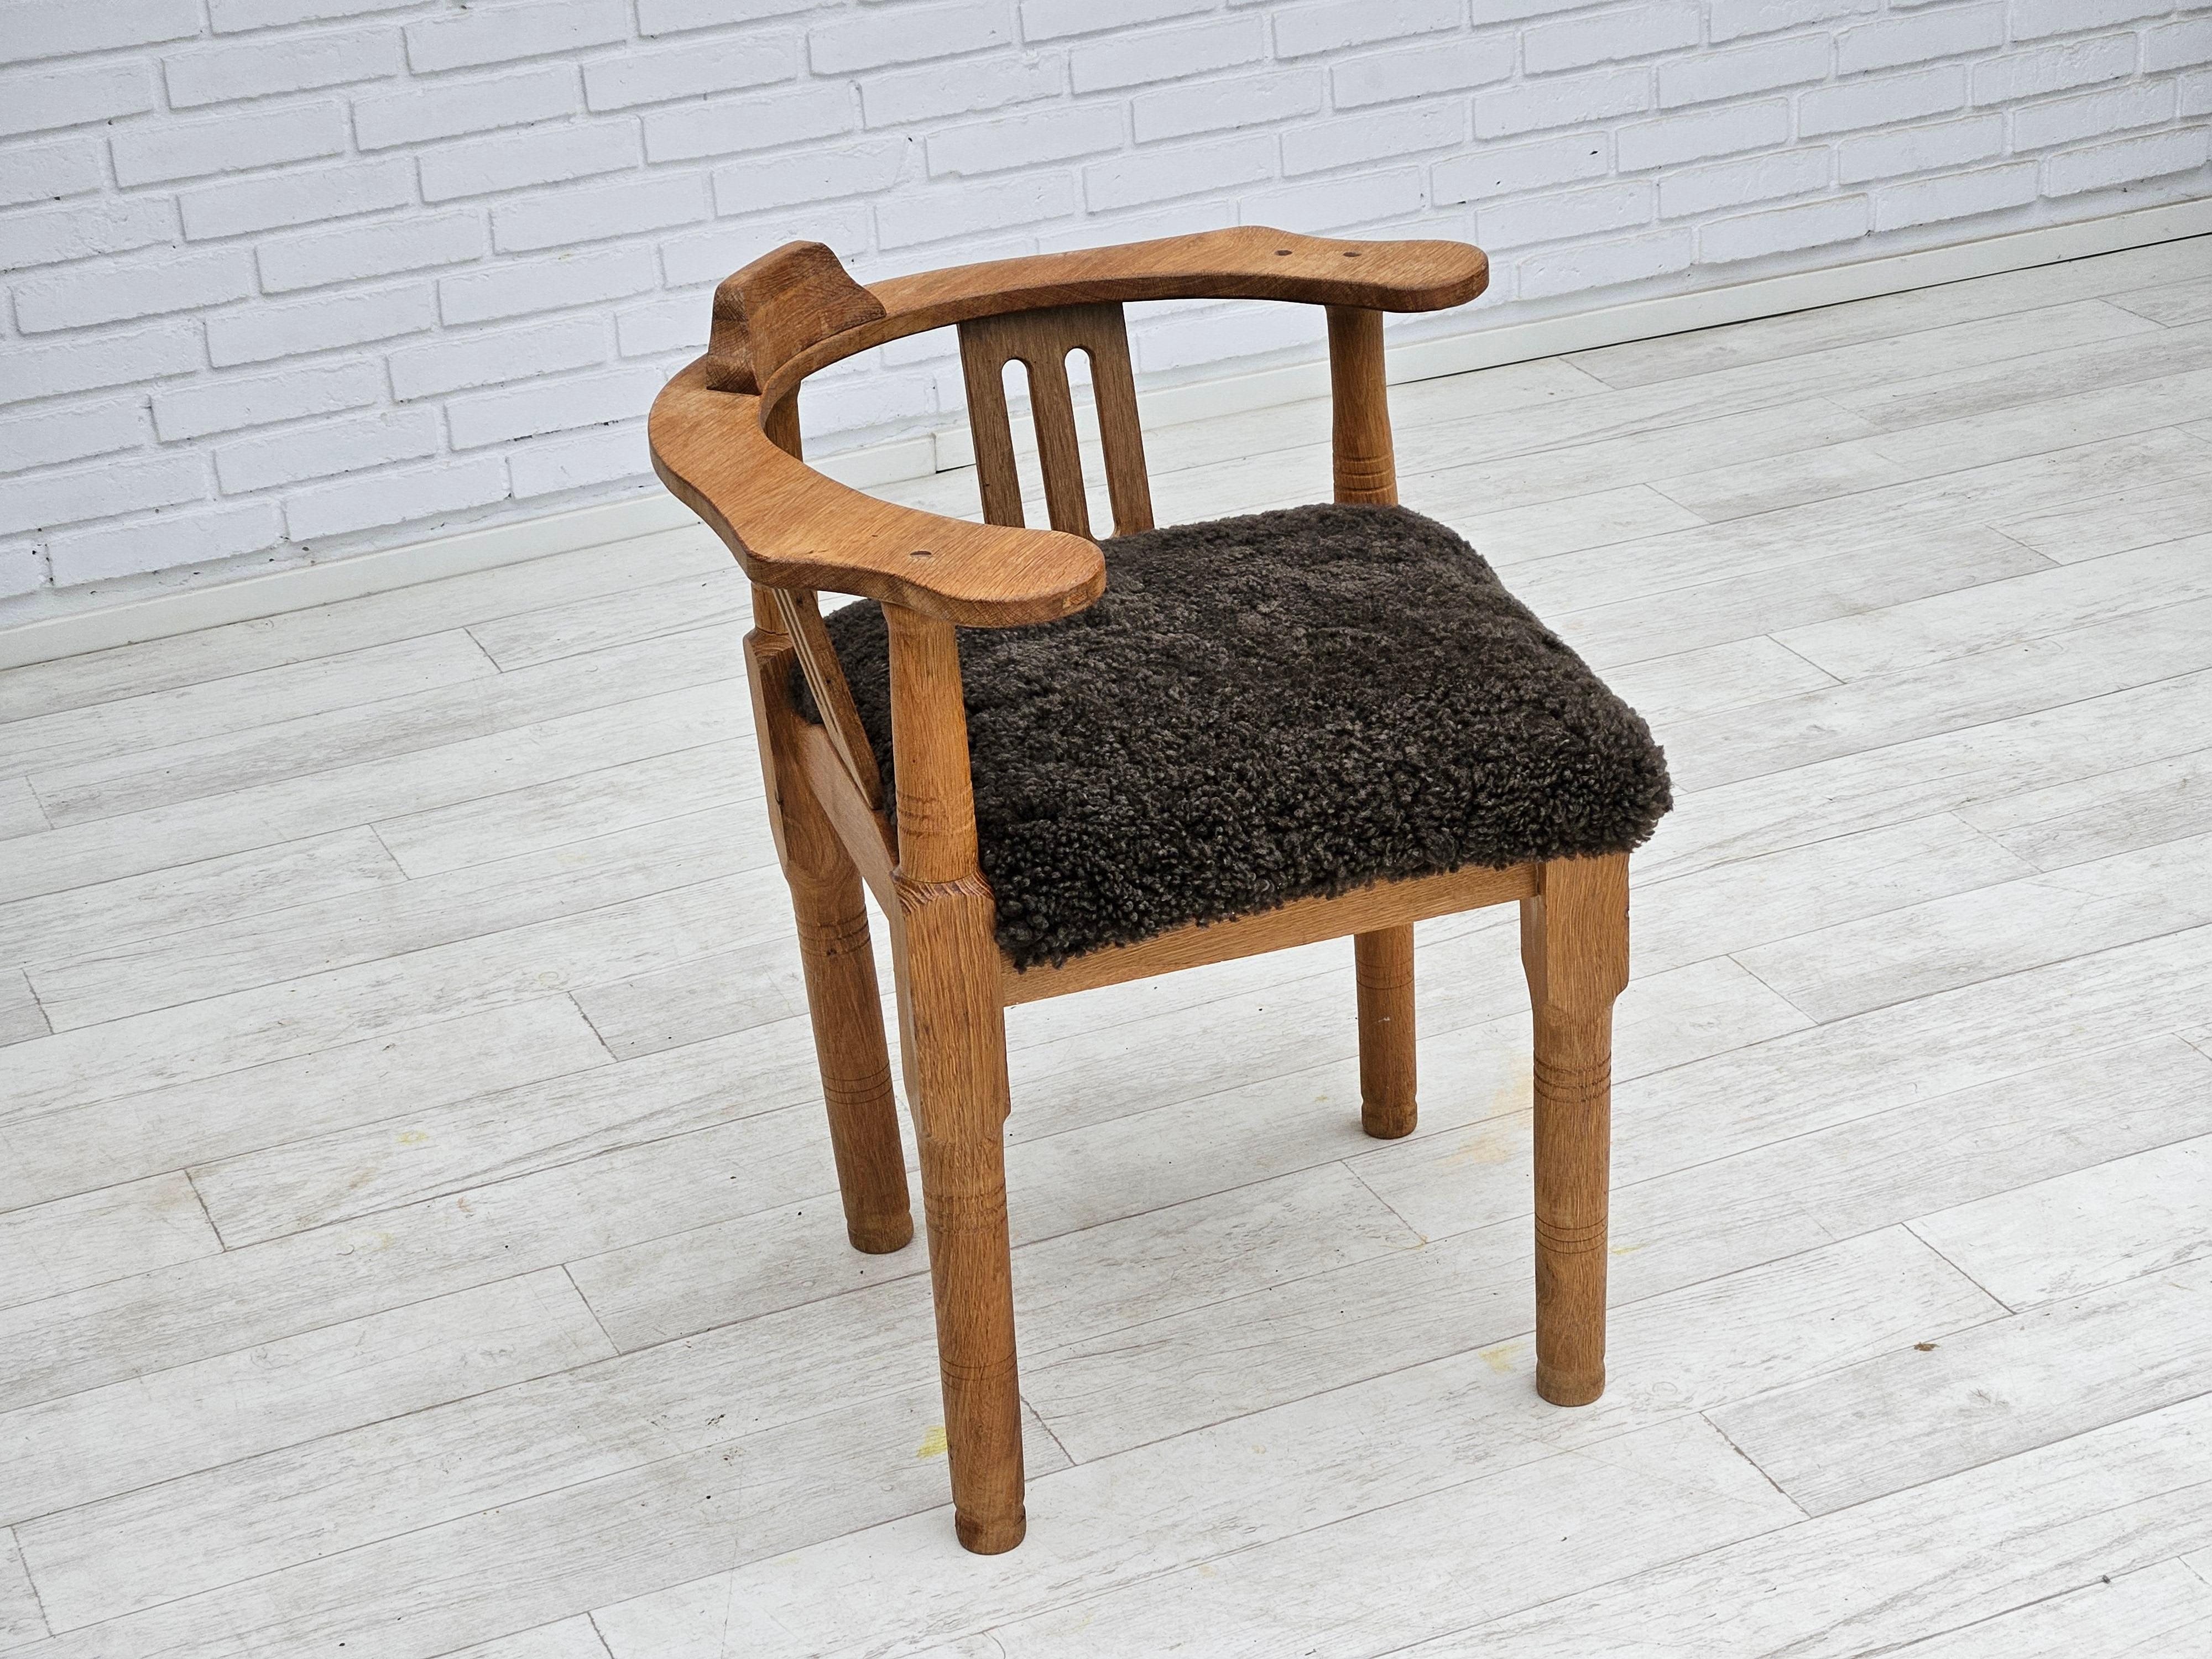 1950s, Danish design. Reupholstered armchair in quality New Zealand sheepskin Wellington. Renewed oak wood. Manufactured by Danish furniture manufacturer in about 1955s. Reupholstered by craftsman.